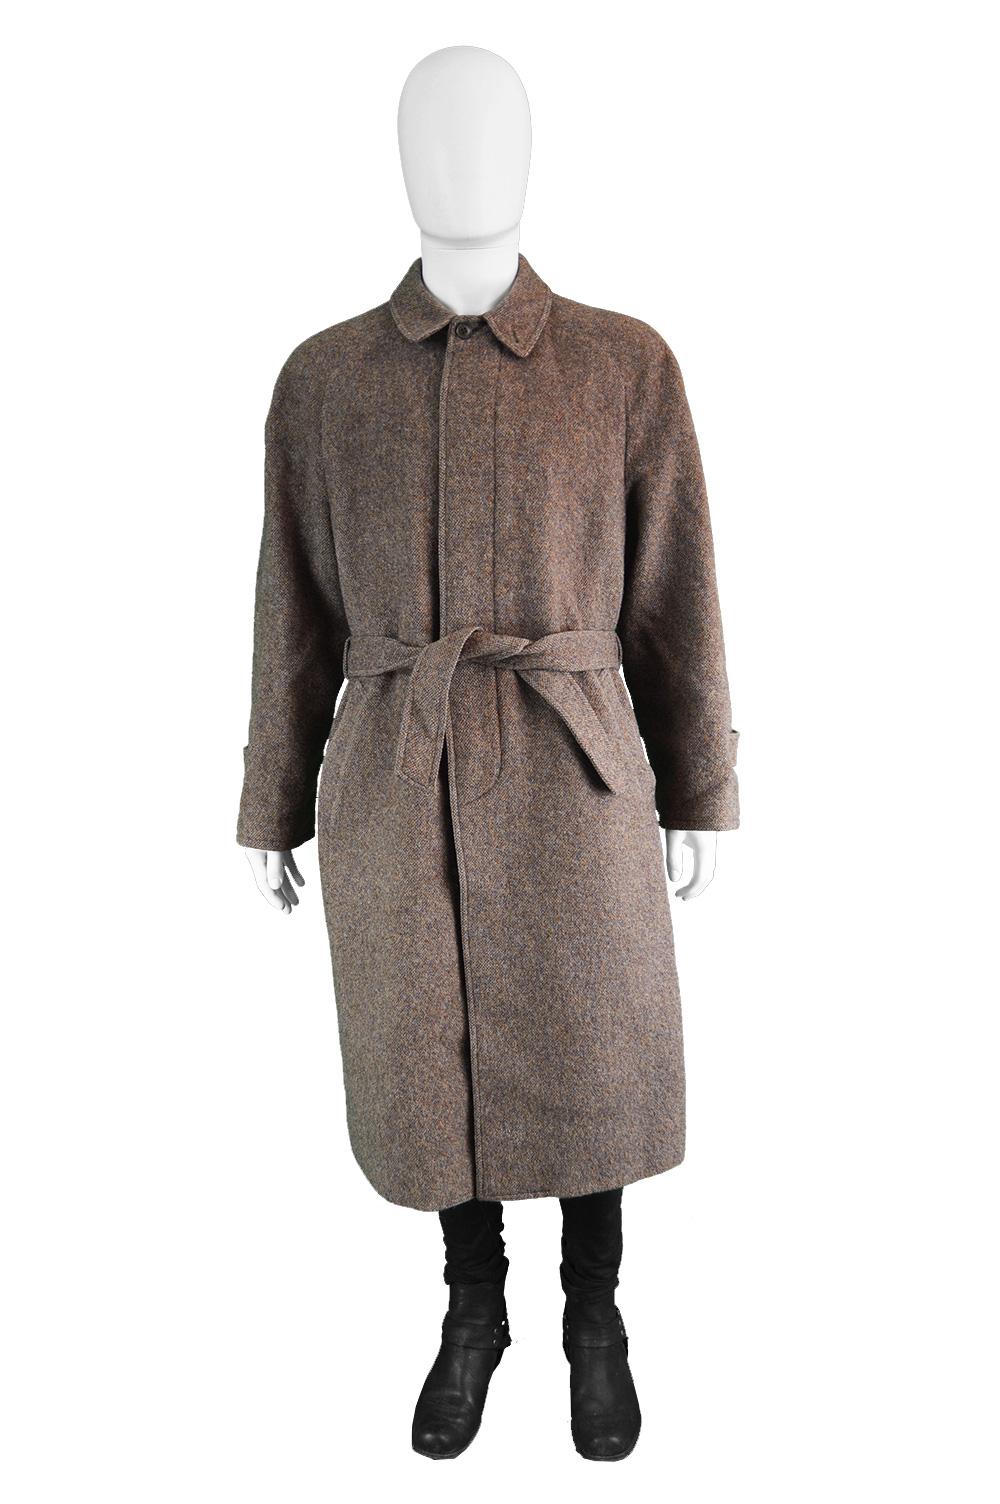 Louis Feraud Men's Vintage Brown Italian Wool Tweed Fly Front Over Coat, 1980s

Size: Marked 50 which is roughly a men's Medium to Large. Please check measurements)
Chest - 46” / 117cm (please allow roughly 4-6